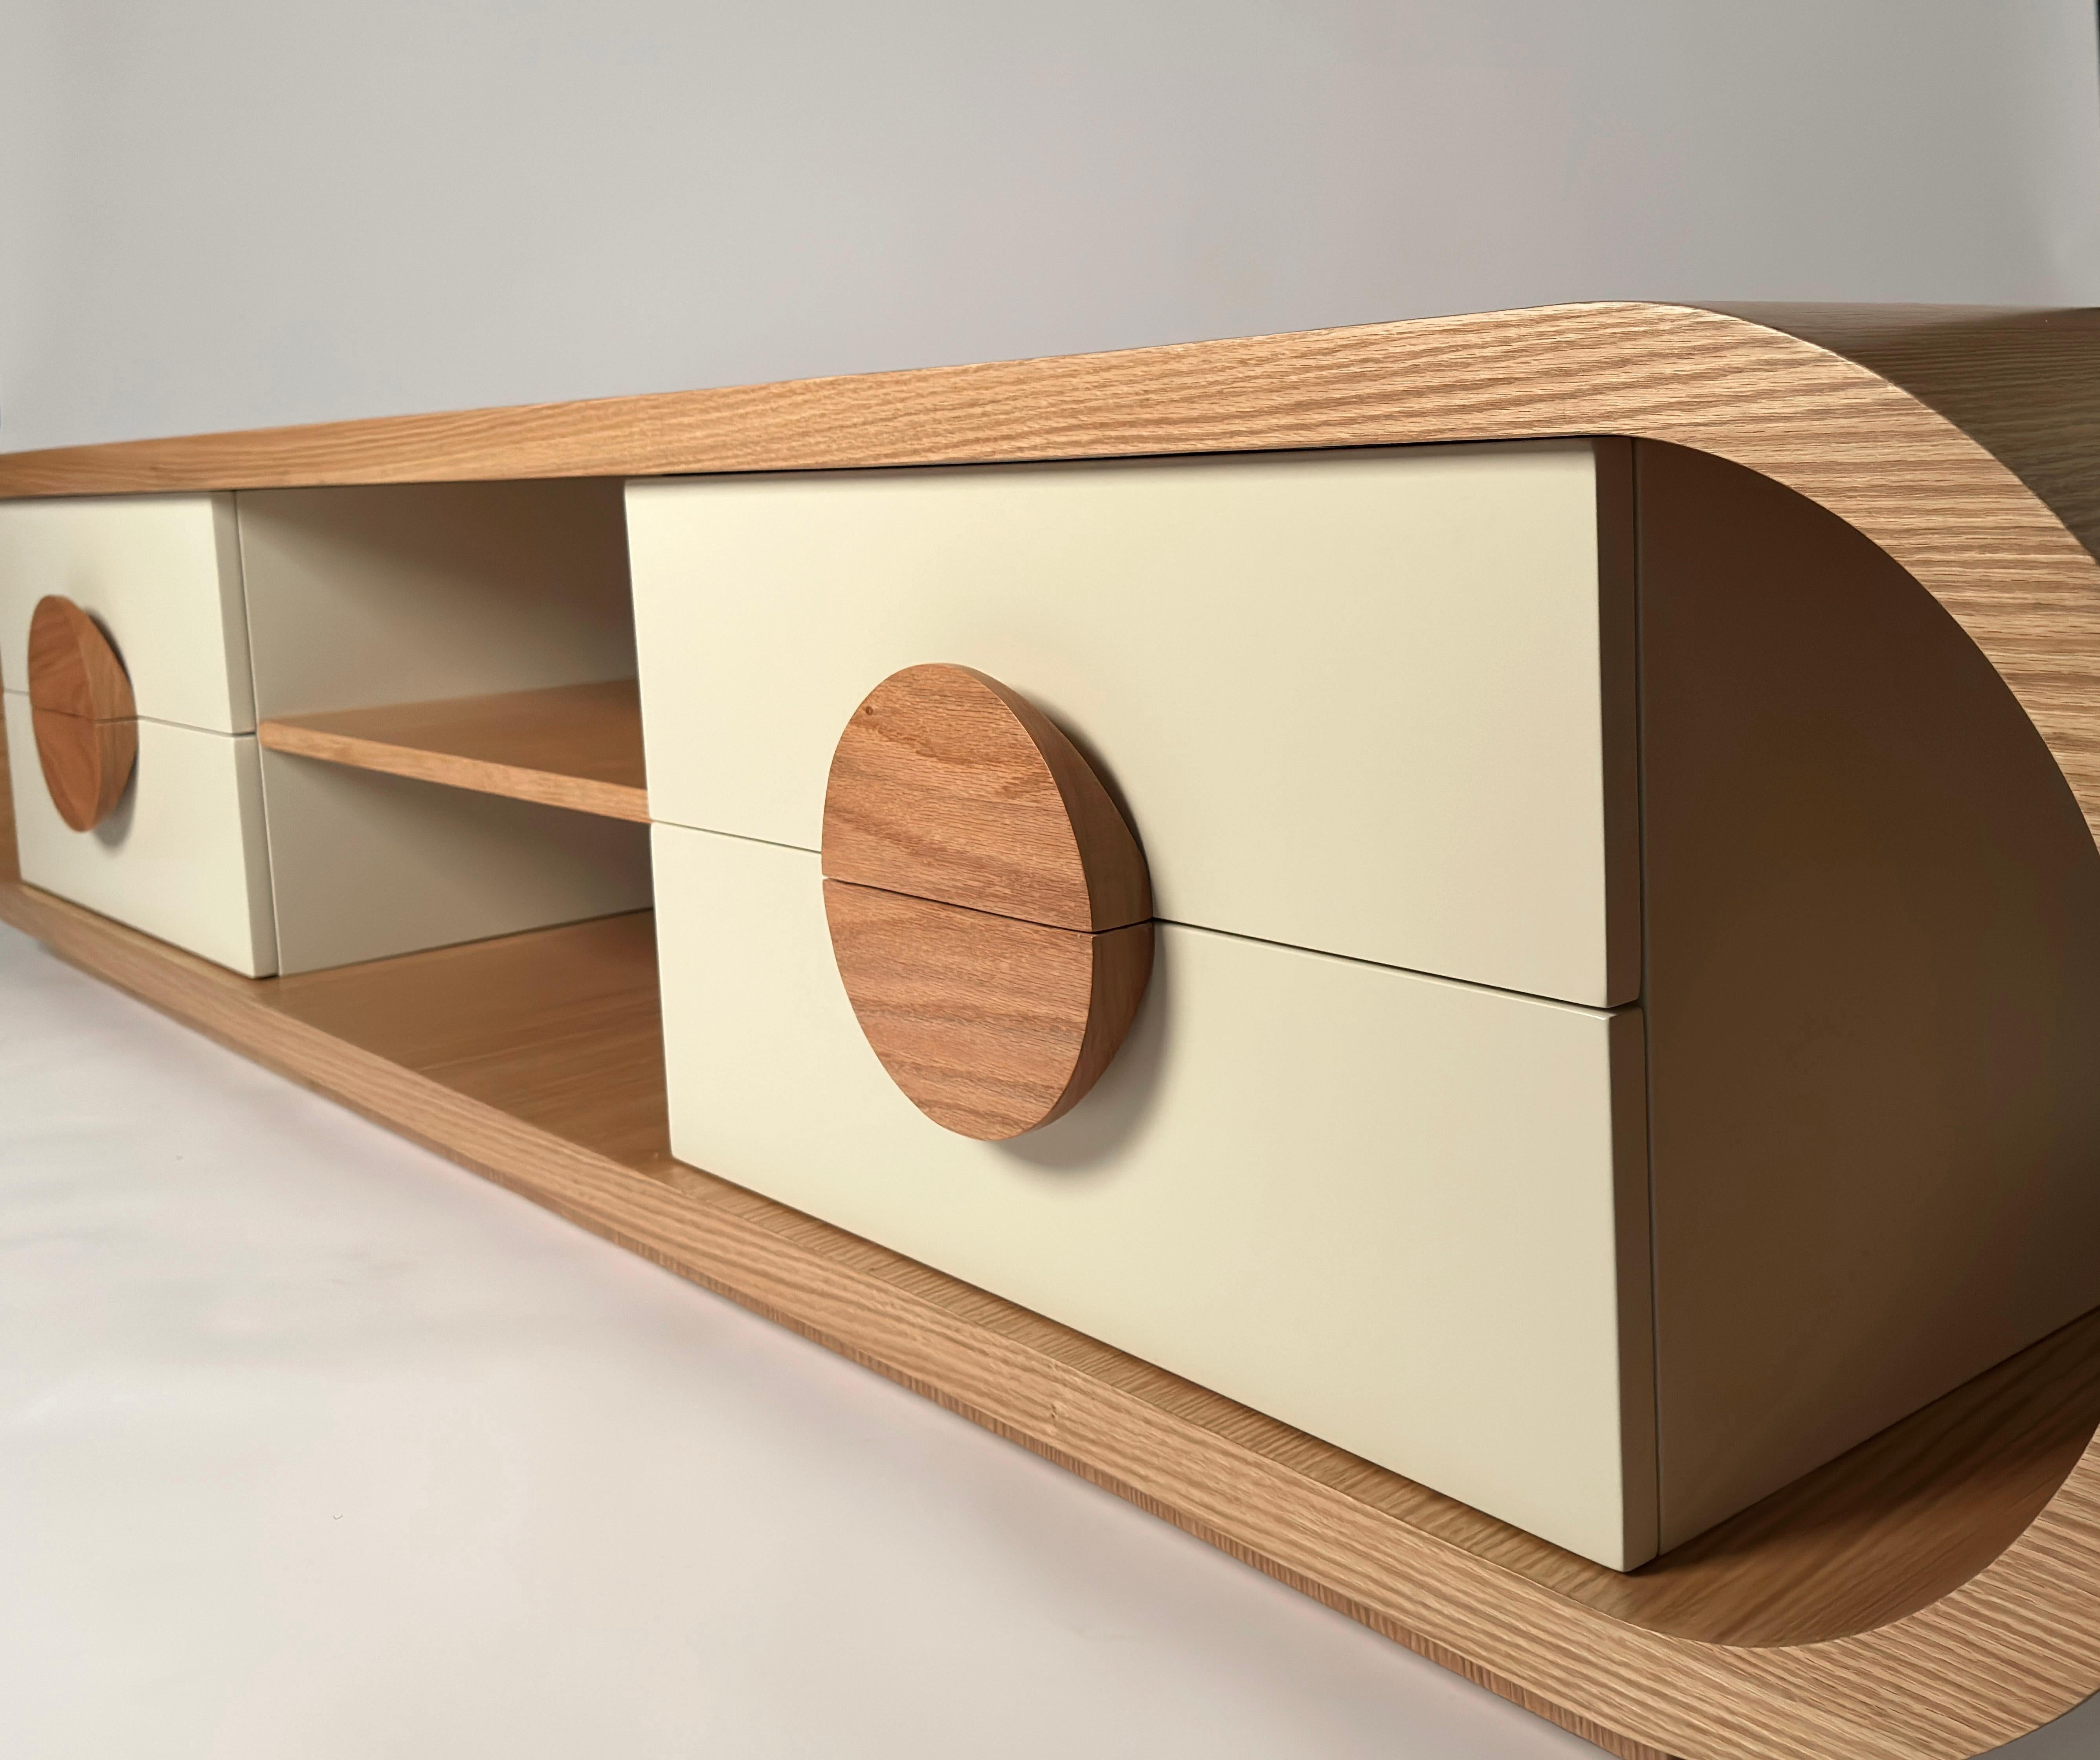 An adaptation of the O-line with soft curves and bold functions. Shown here in natural oak wood with Ivory painted drawers. This piece is customizable in different finishes,colors  and size. 
The O line celebrates the skills of Egyptian artisans and